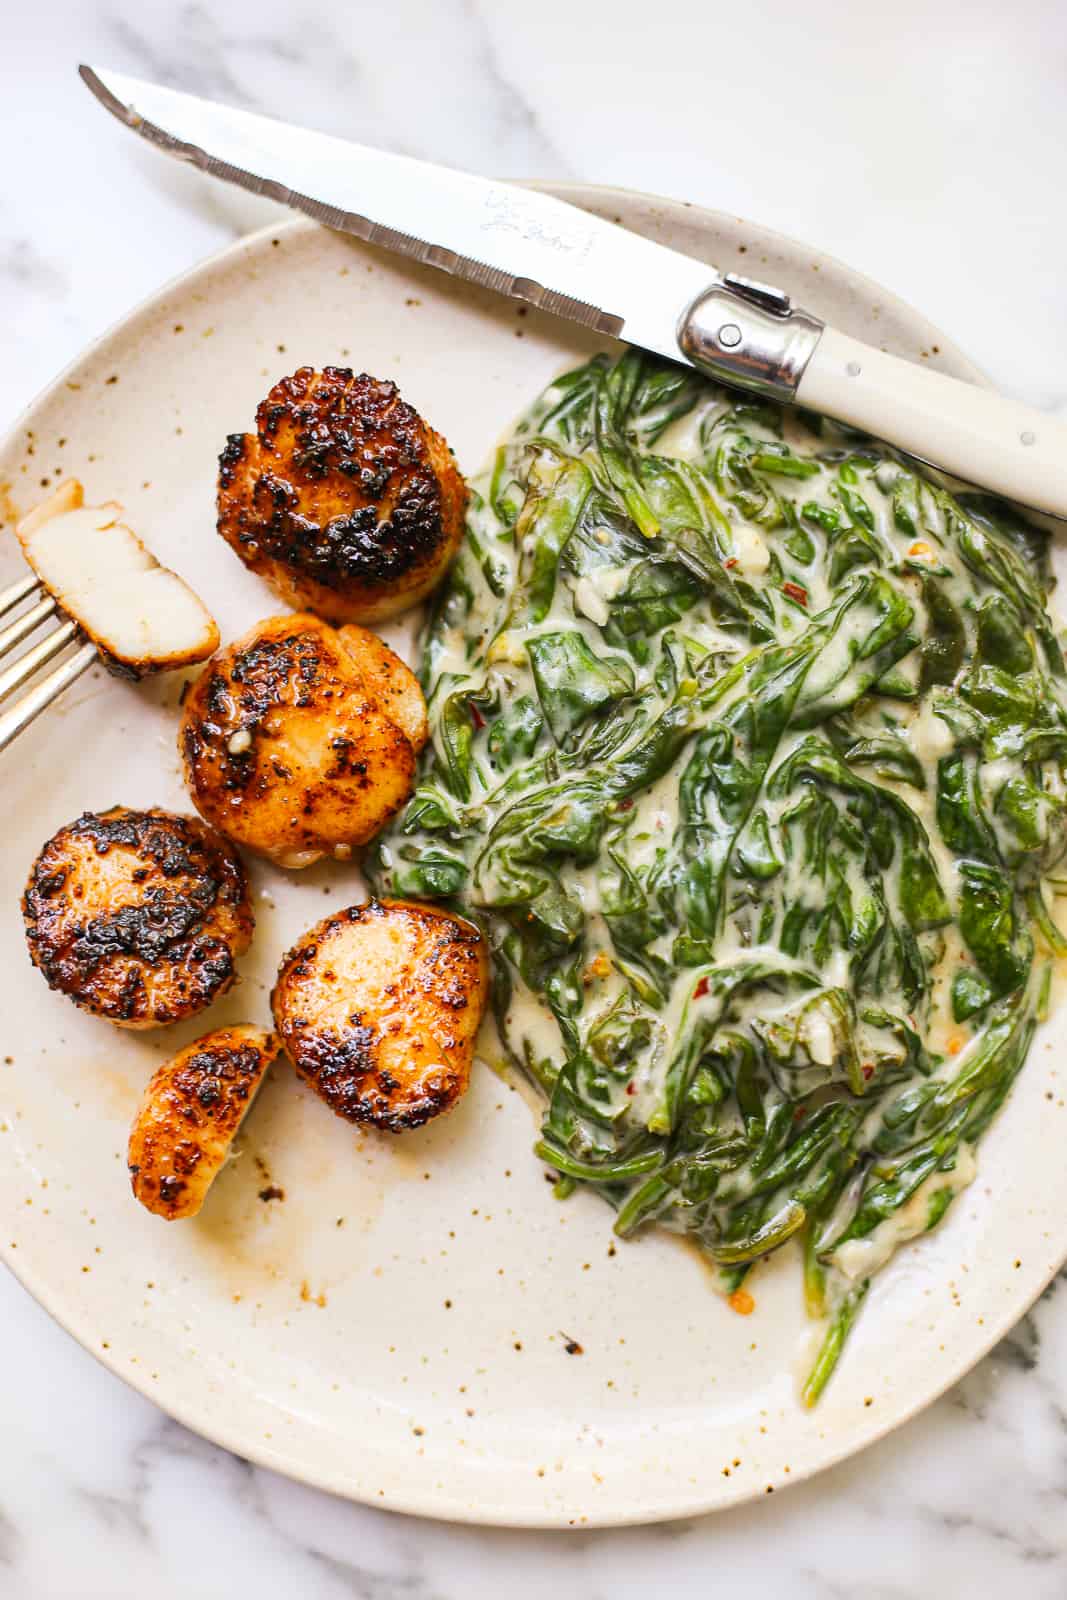 Blackened Scallops with Dairy-Free Creamed Spinach